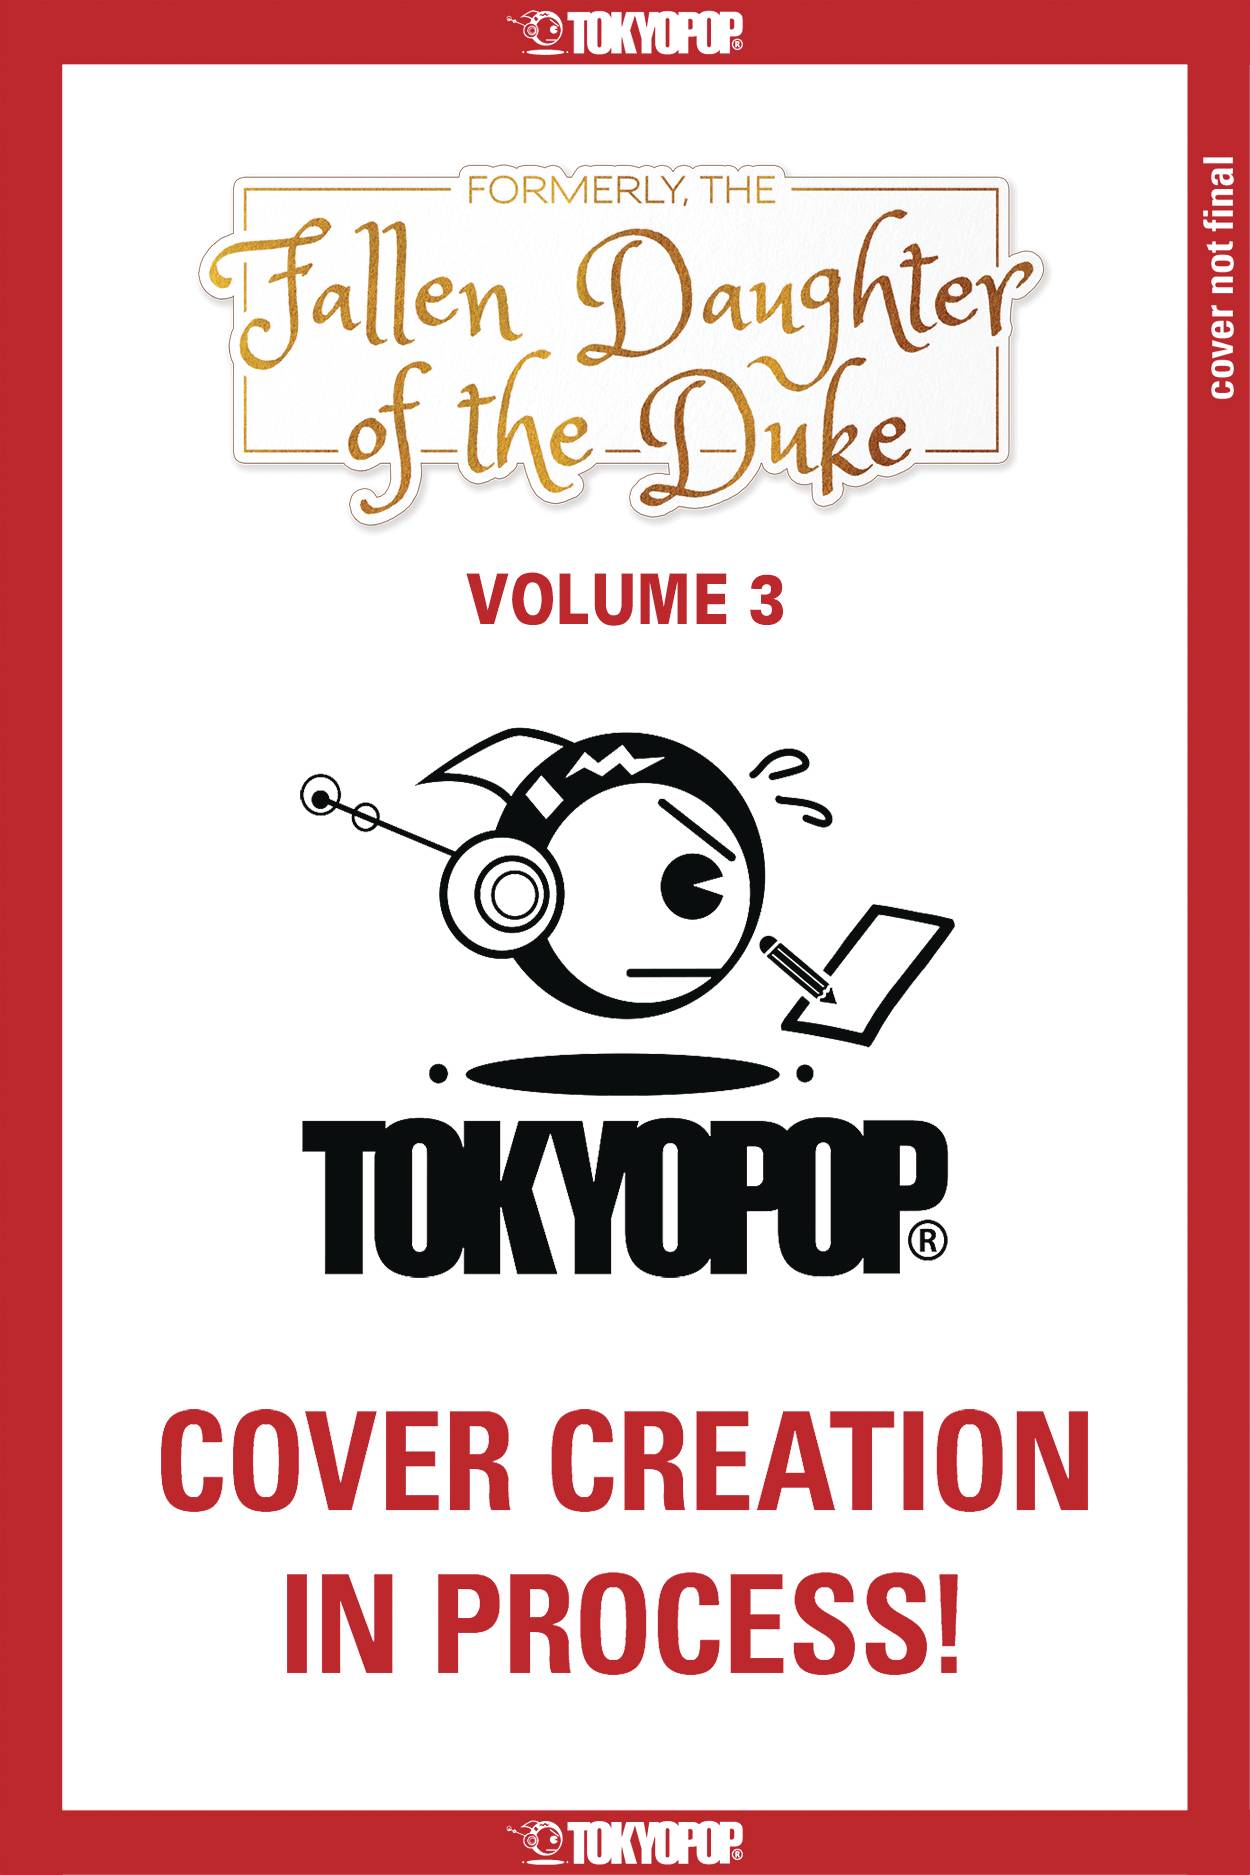 The One Stop Shop Comics & Games Formerly Fallen Daughter Of Duke Gn Vol 03 (C: 0-1-2) (2/15/2023) TOKYOPOP